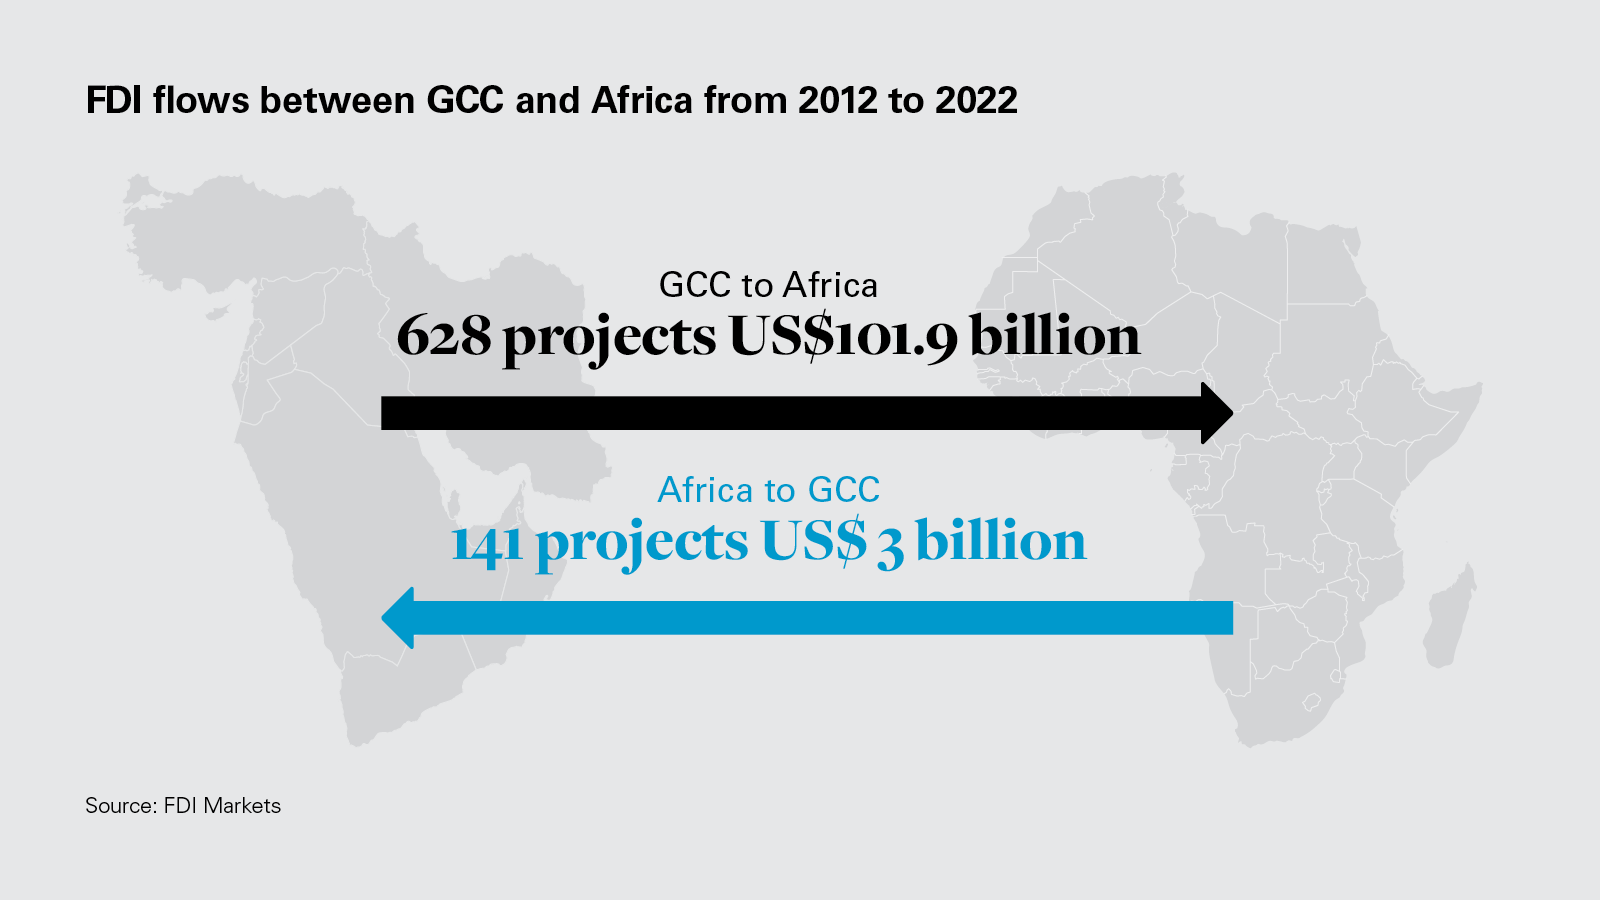 FDI flows between GCC and Africa from 2012 to 2022 